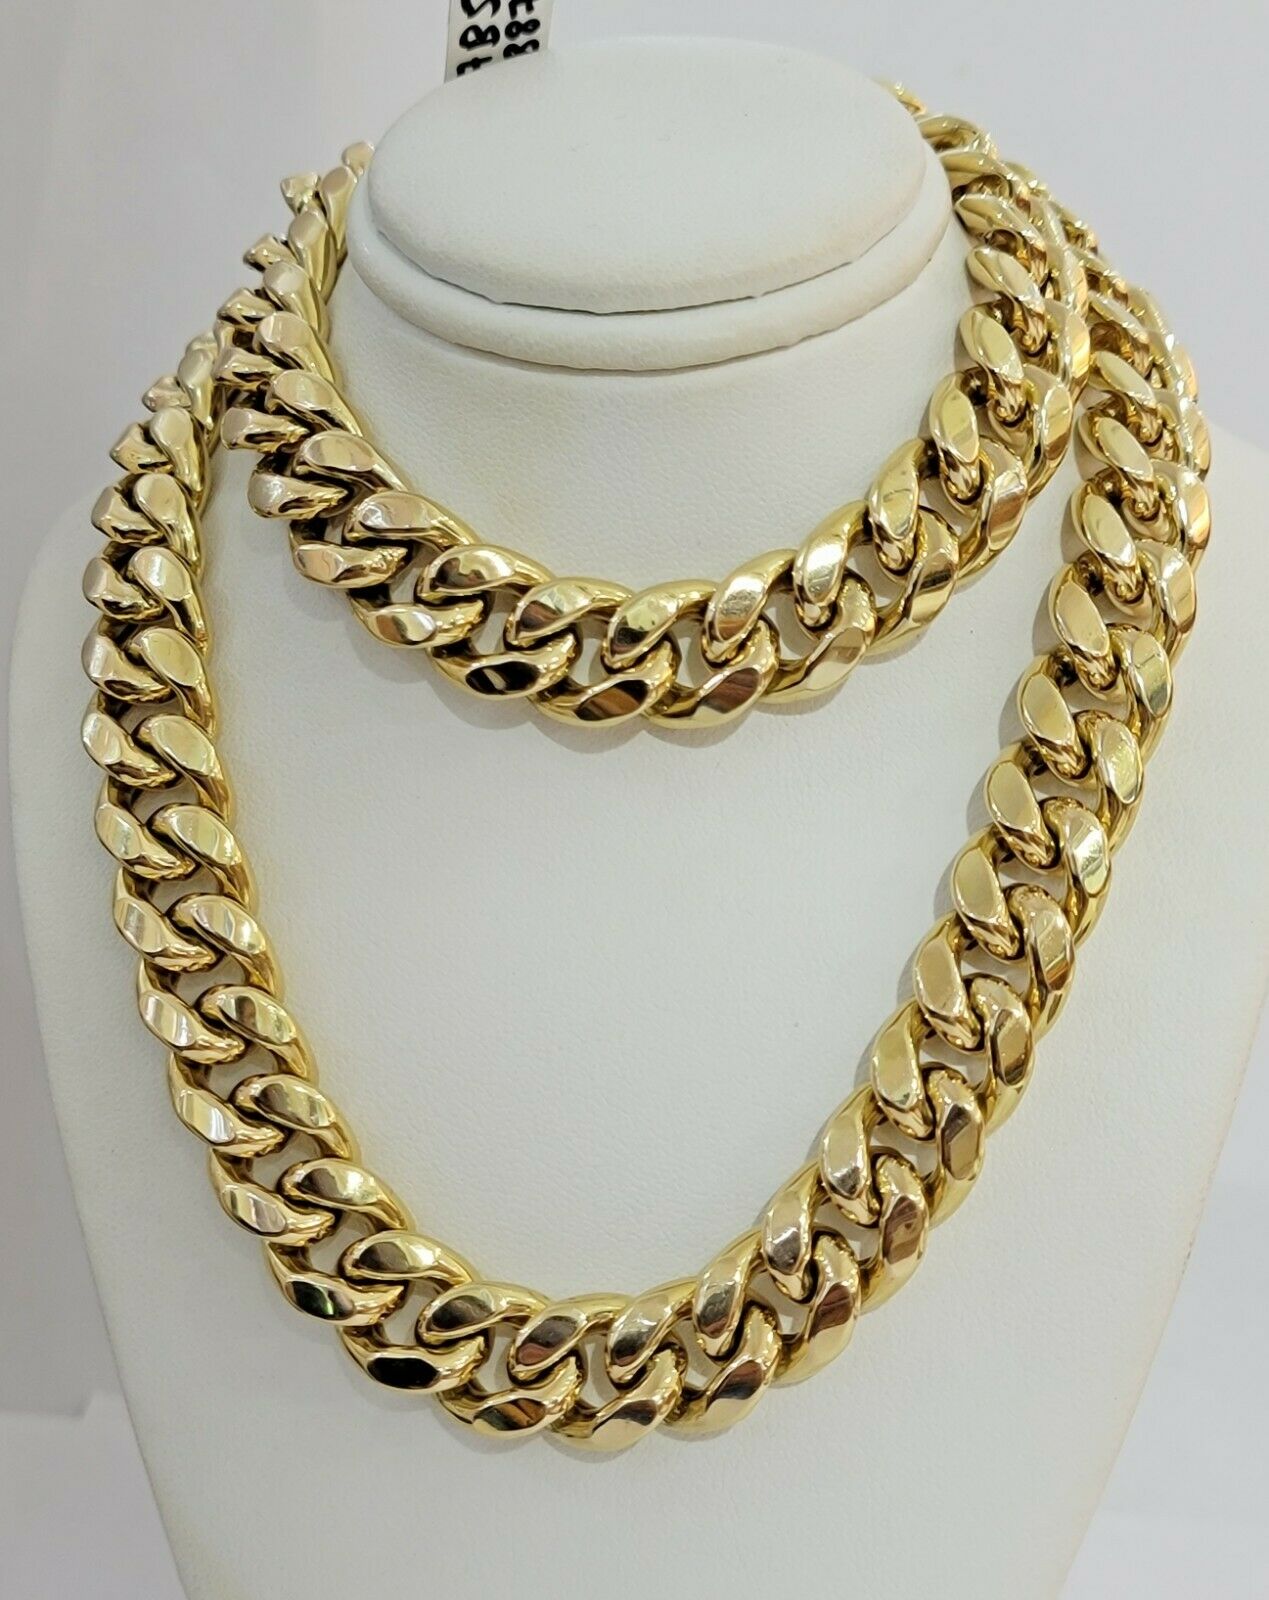 REAL 10k Gold Miami Cuban Chain 13mm Link Mens Necklace 24" 10kt Yellow, STRONG